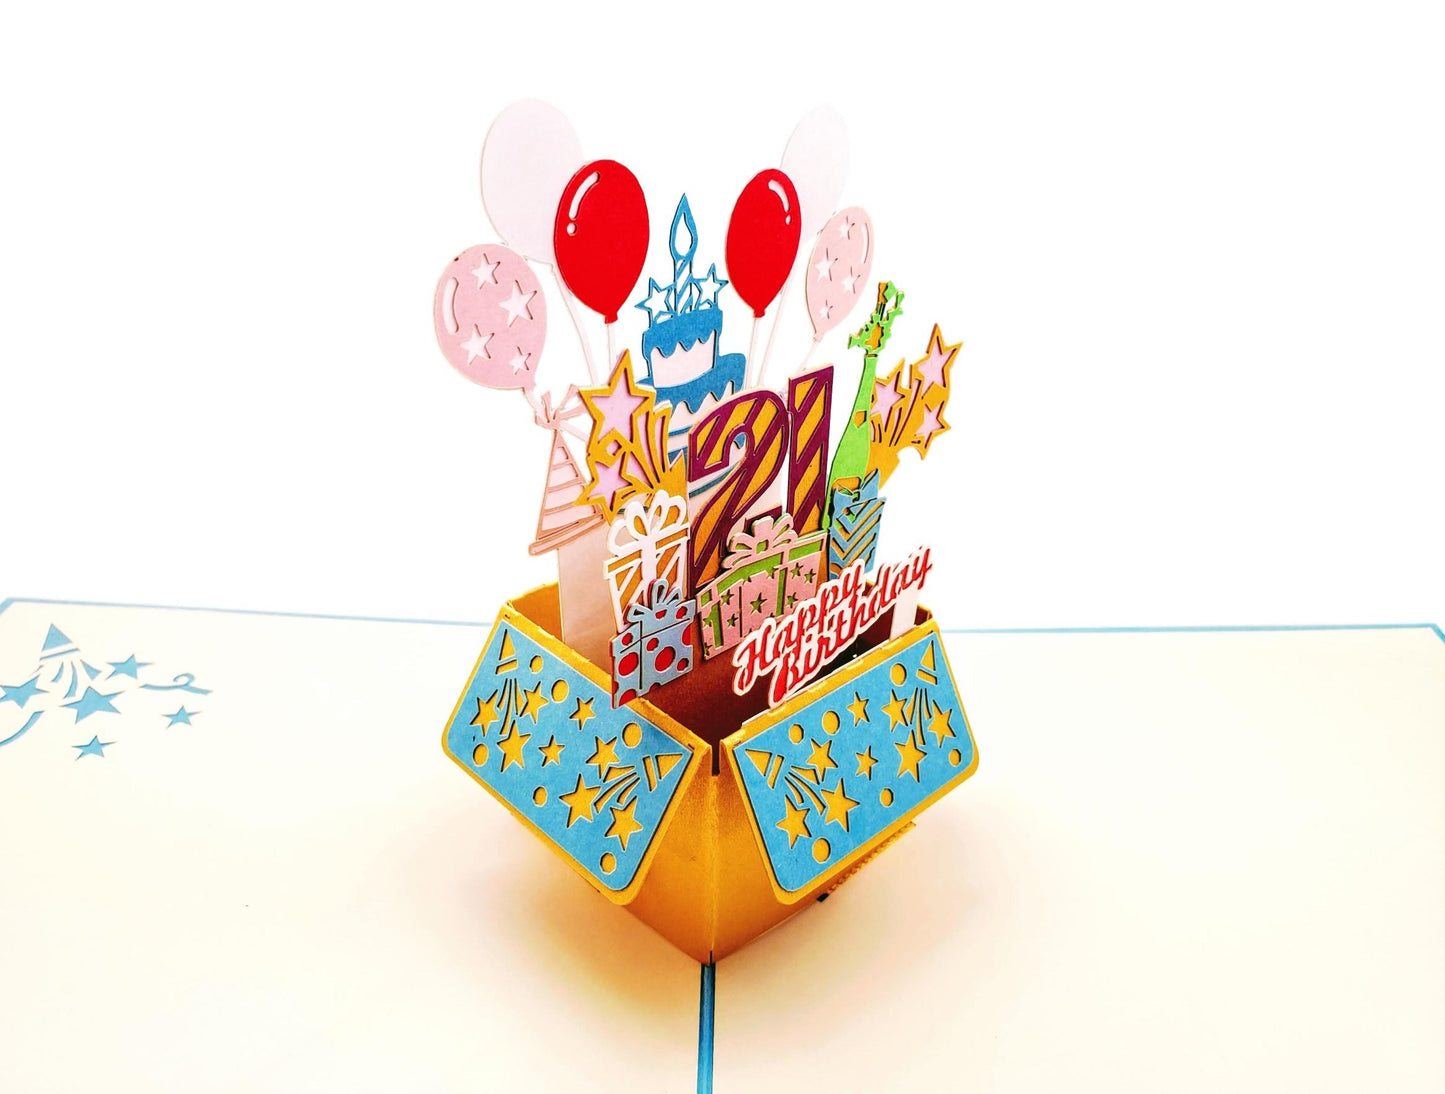 21st Blue Party Box 3D Pop Up Greeting Card - Awesome - Balloons - best wishes - Birthday - Brighten - iGifts And Cards